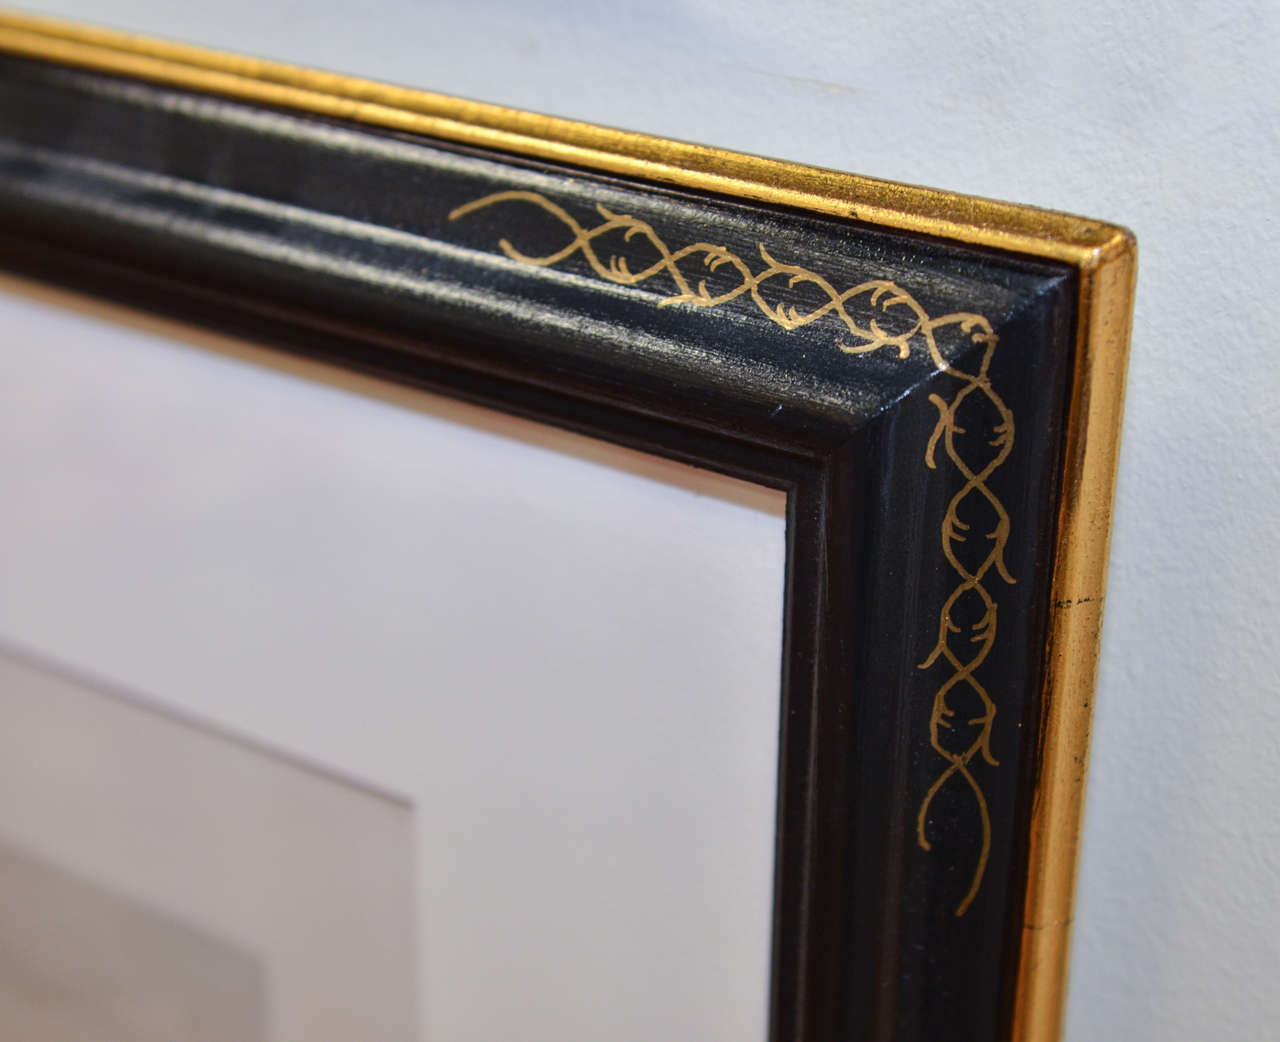 Four beautiful antique black and antique white Dutch landscapes.  The frames are custom painted ebony egg with gold details, accompanied with antique white matts.  The 18th century landscapes portray the Dutch countryside, sea, horses, cattle,